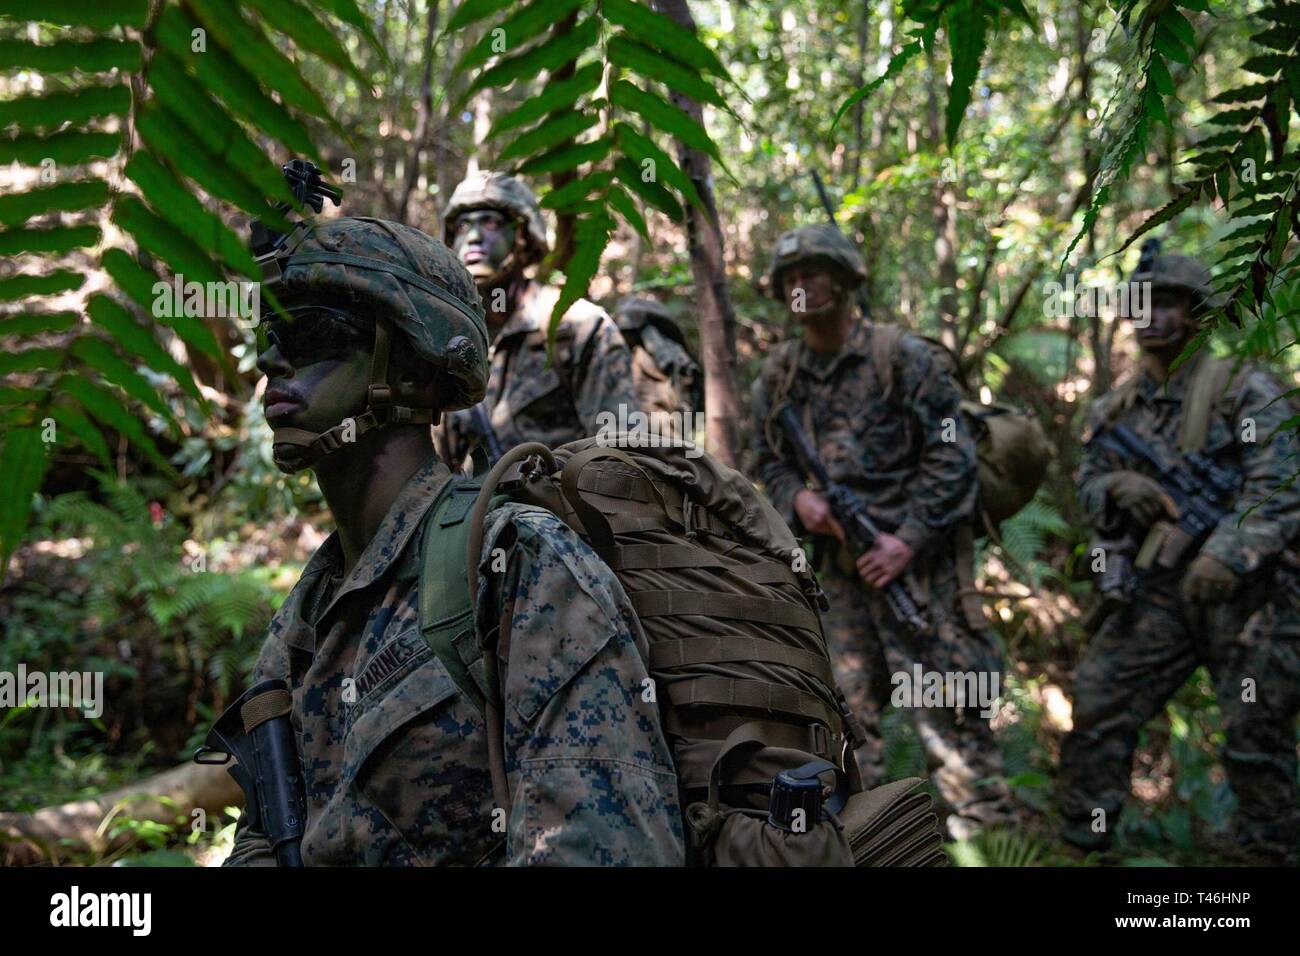 Us Marines With 3rd Battalion 6th Marine Regiment Currently Assigned To 3rd Marine Division